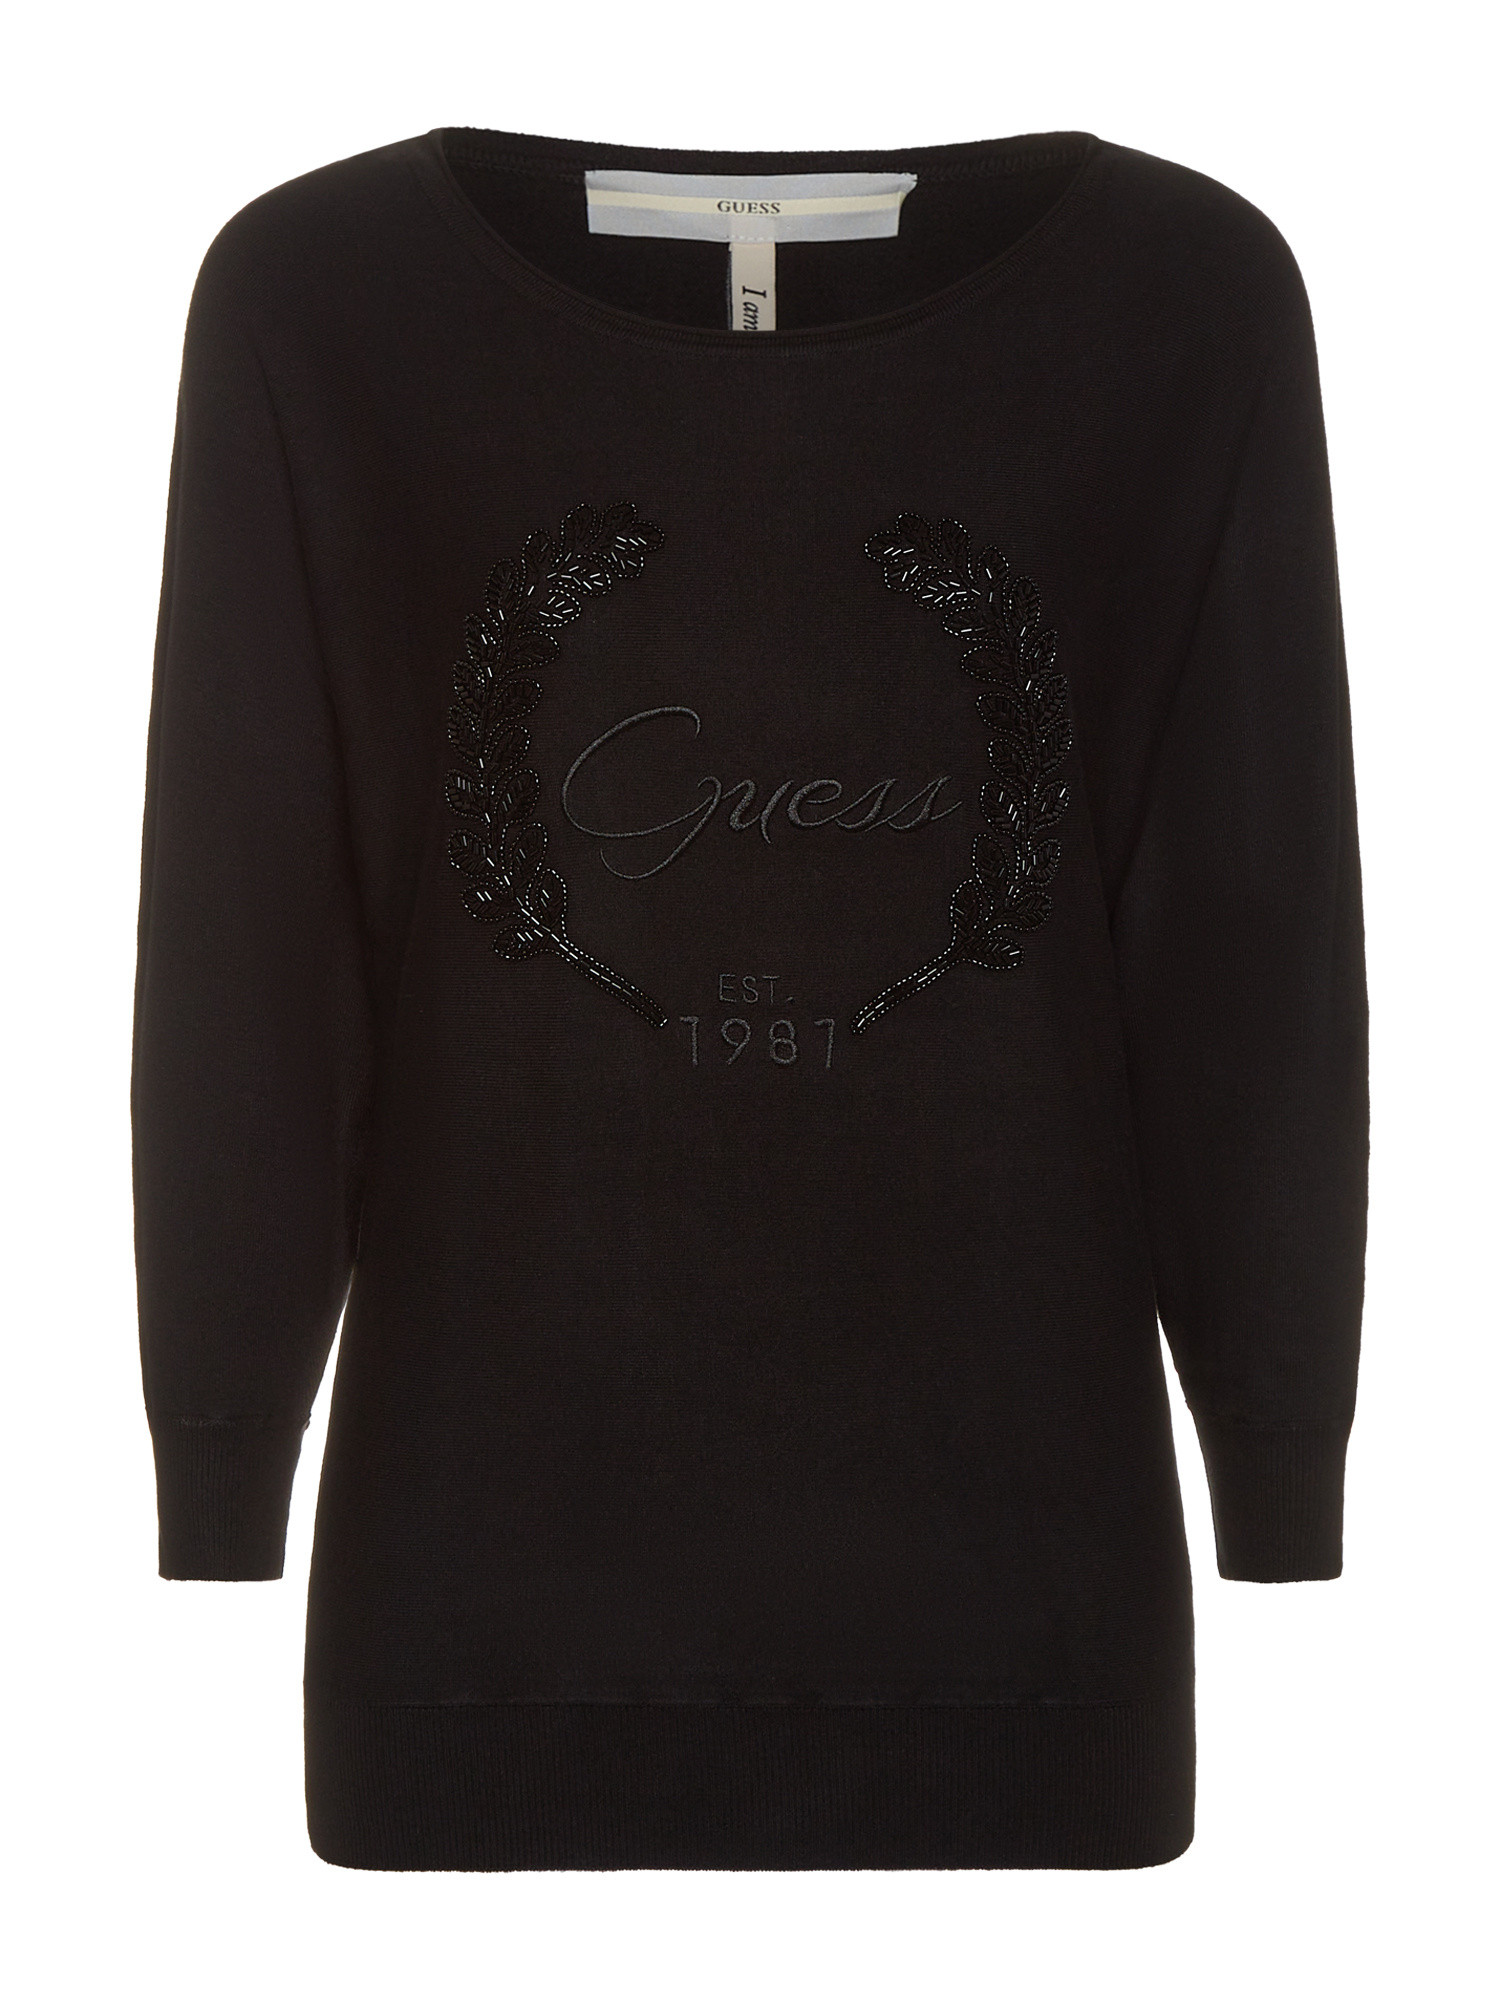 Guess - Sweater with logo, Black, large image number 0